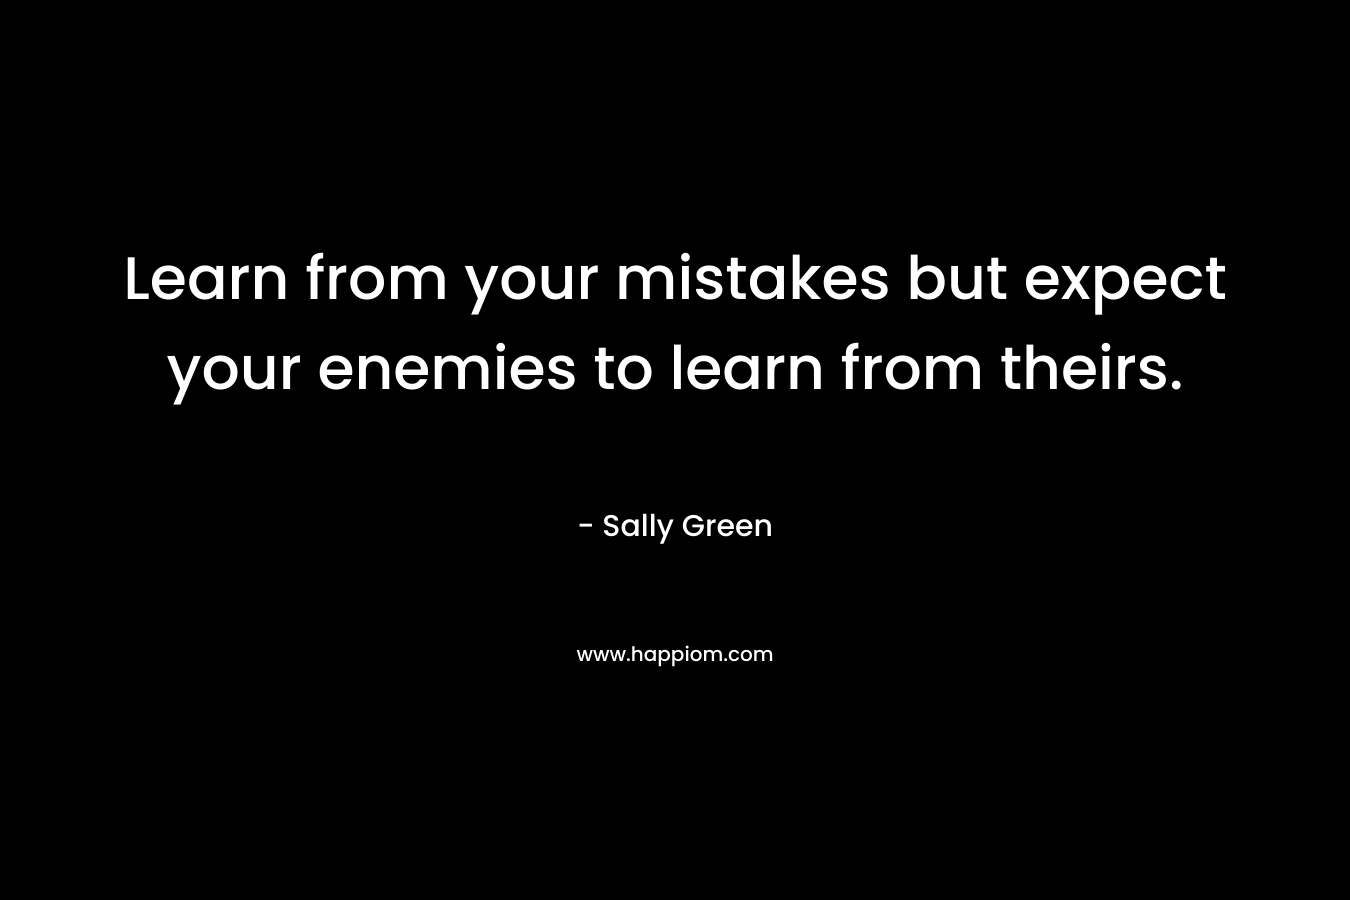 Learn from your mistakes but expect your enemies to learn from theirs. – Sally Green